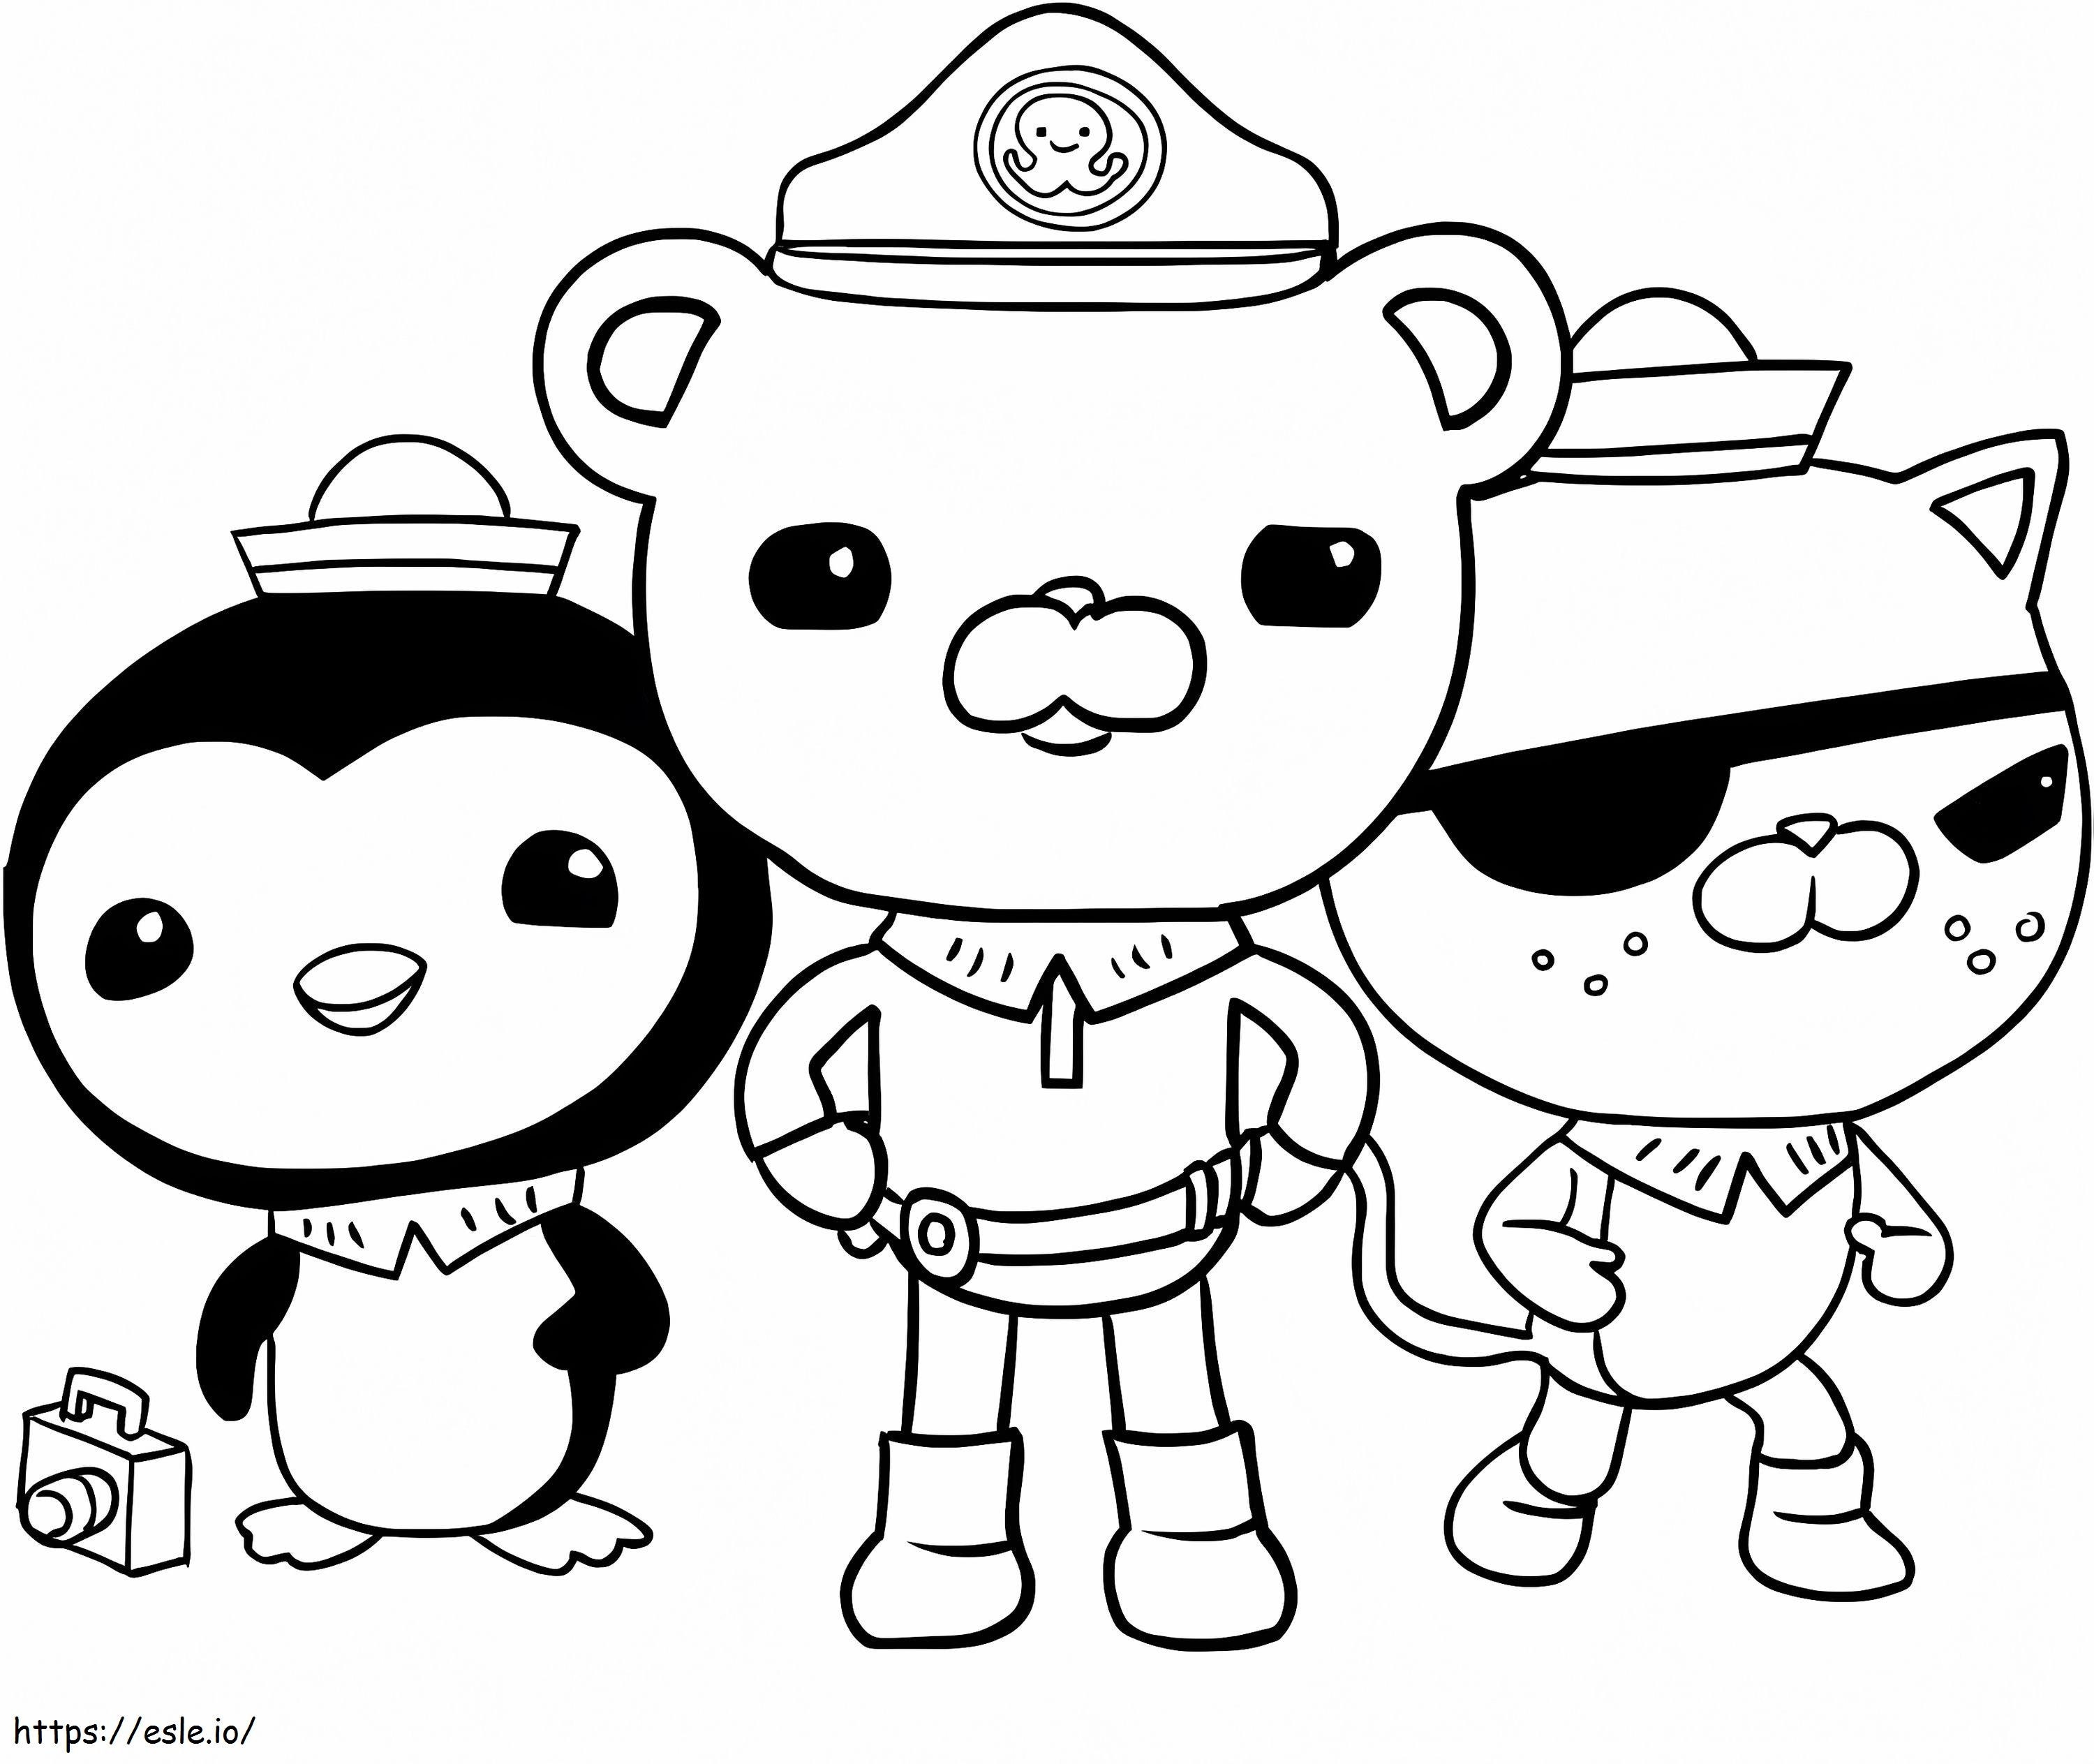 Kawazii And Friend Smiling coloring page